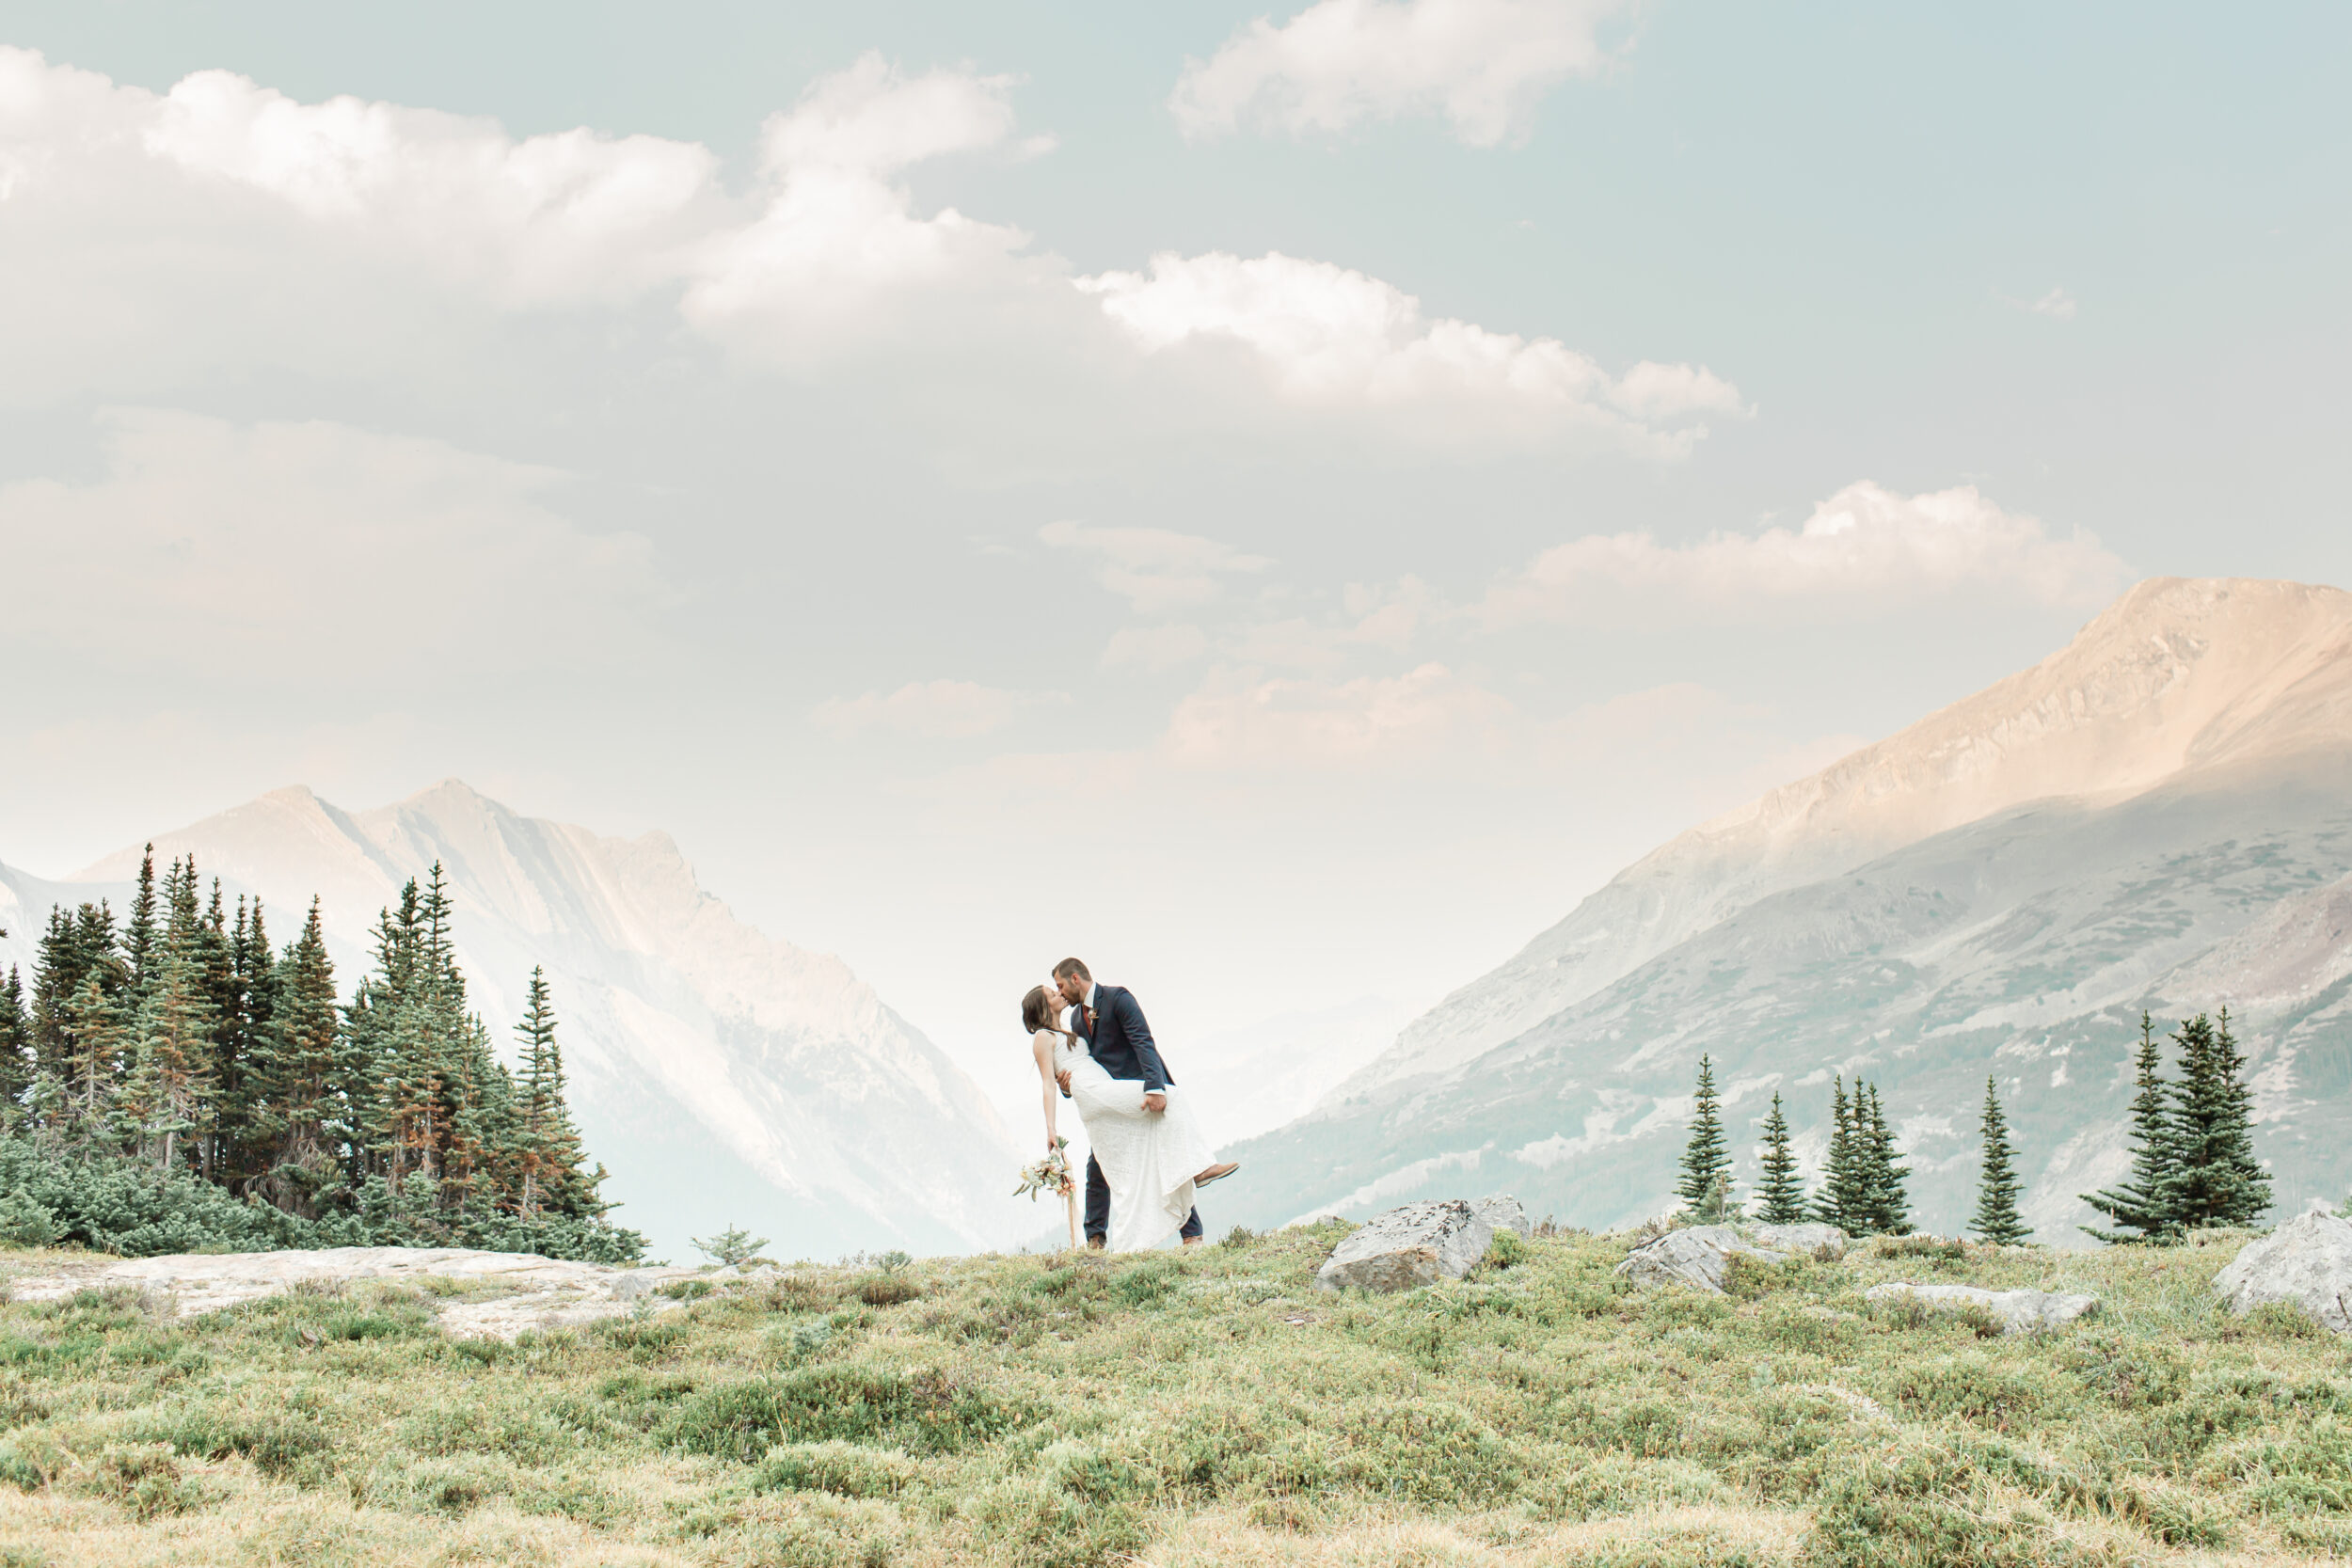 A man and woman share a kiss against a beautiful mountain backdrop.